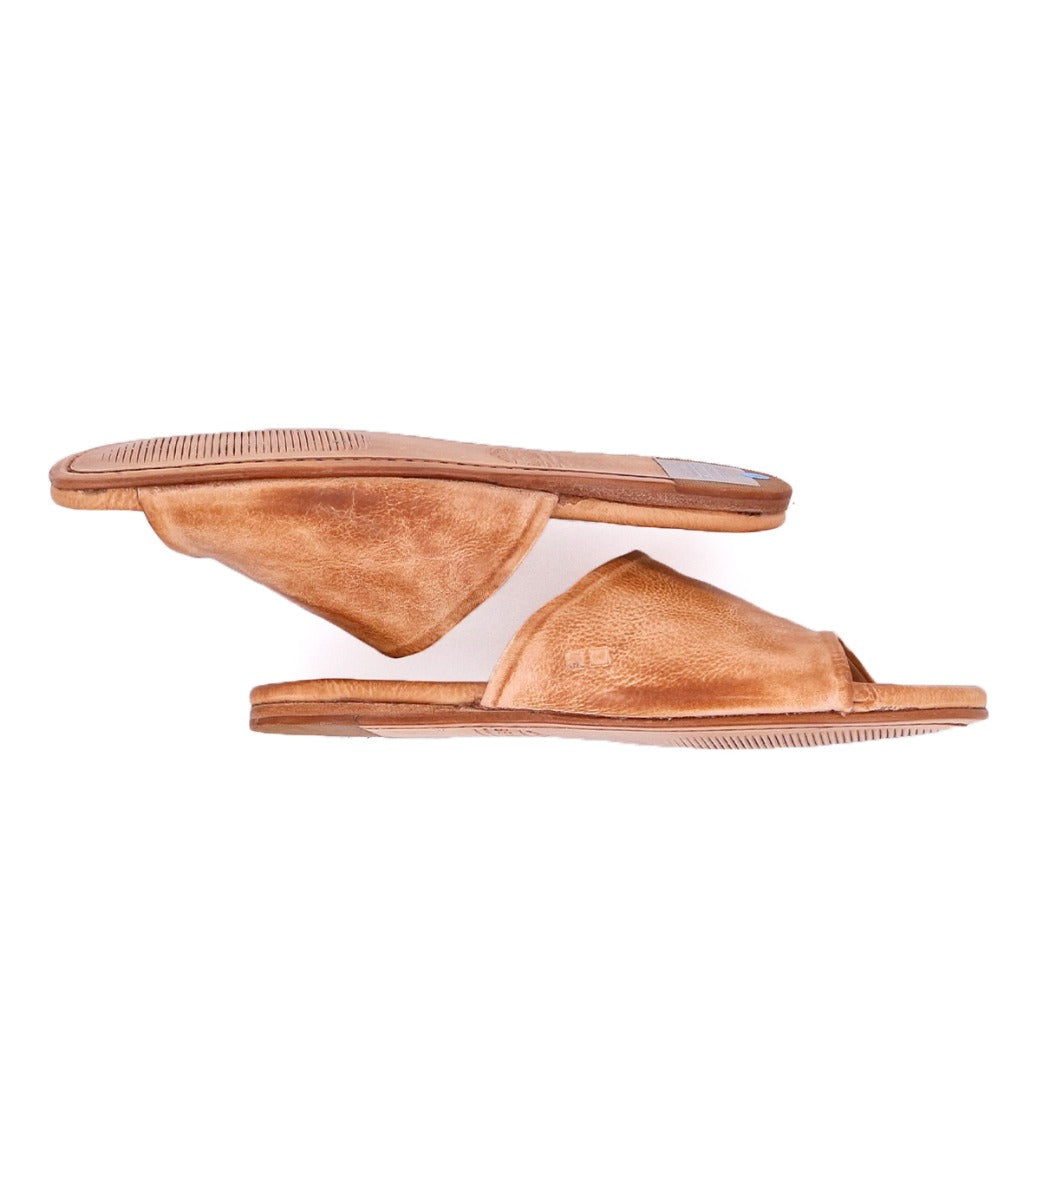 A pair of Gia tan leather slide on sandals by Bed Stu.